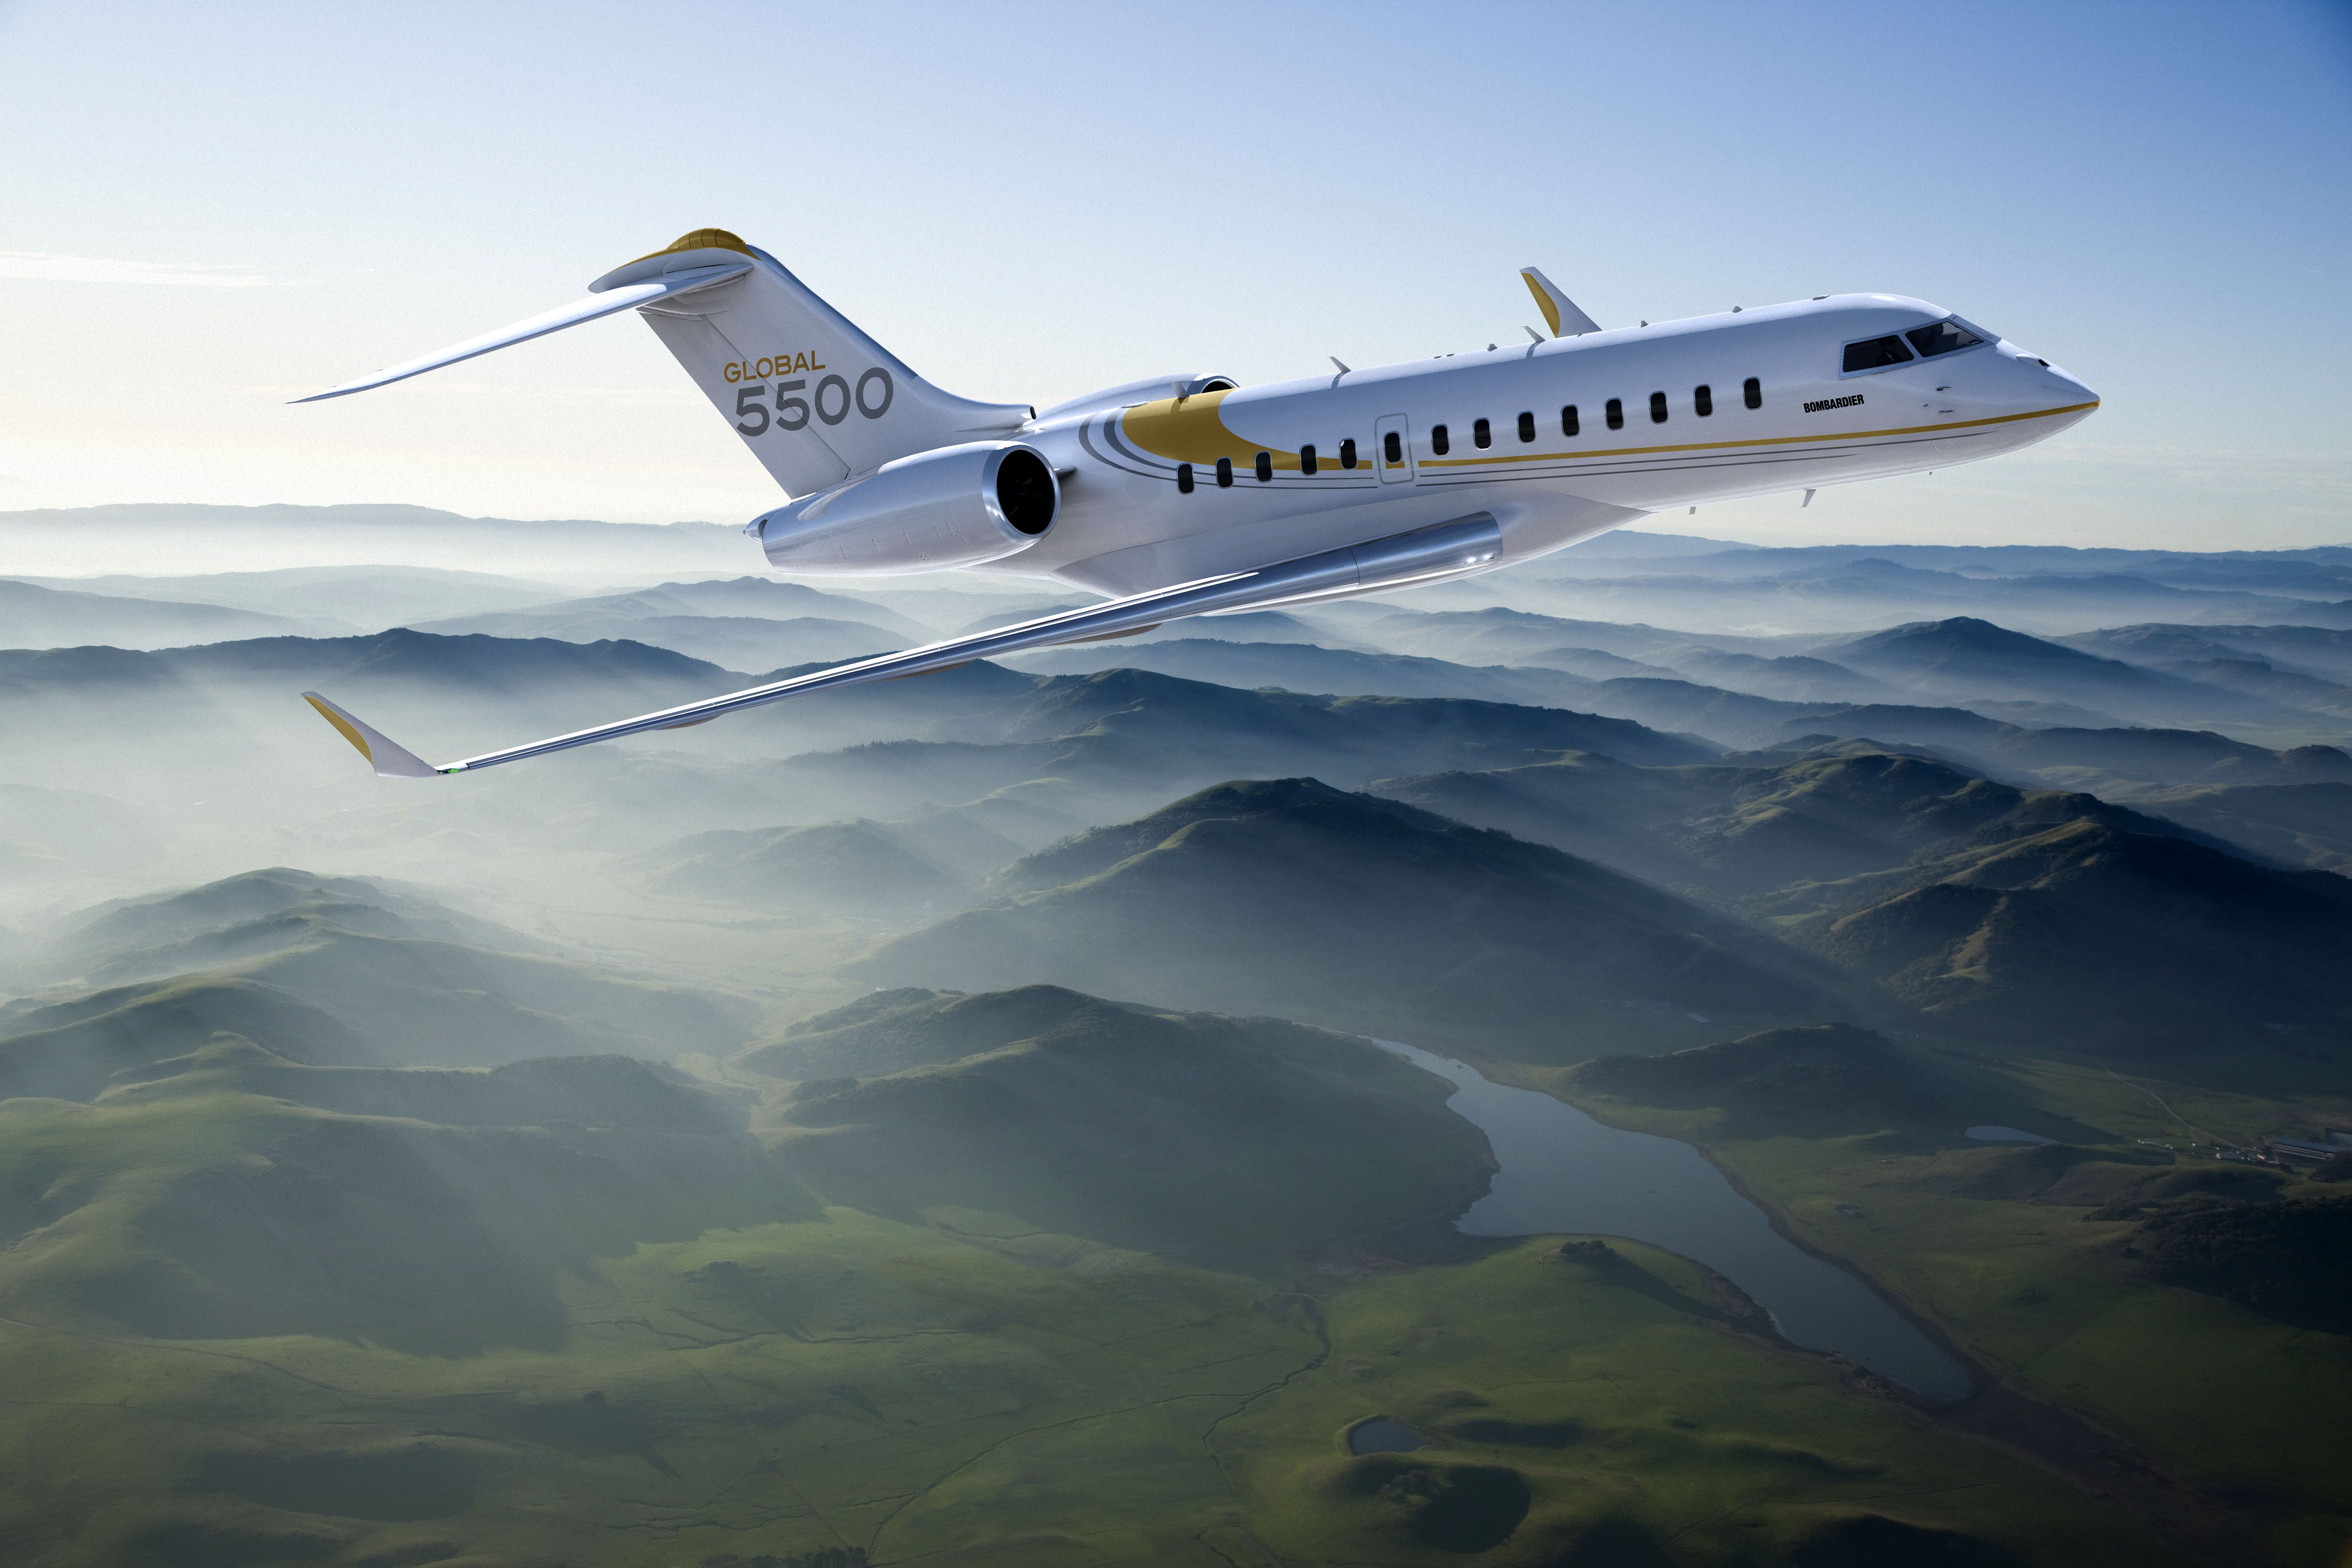 A Bombardier Global 5500 flying above mountains.